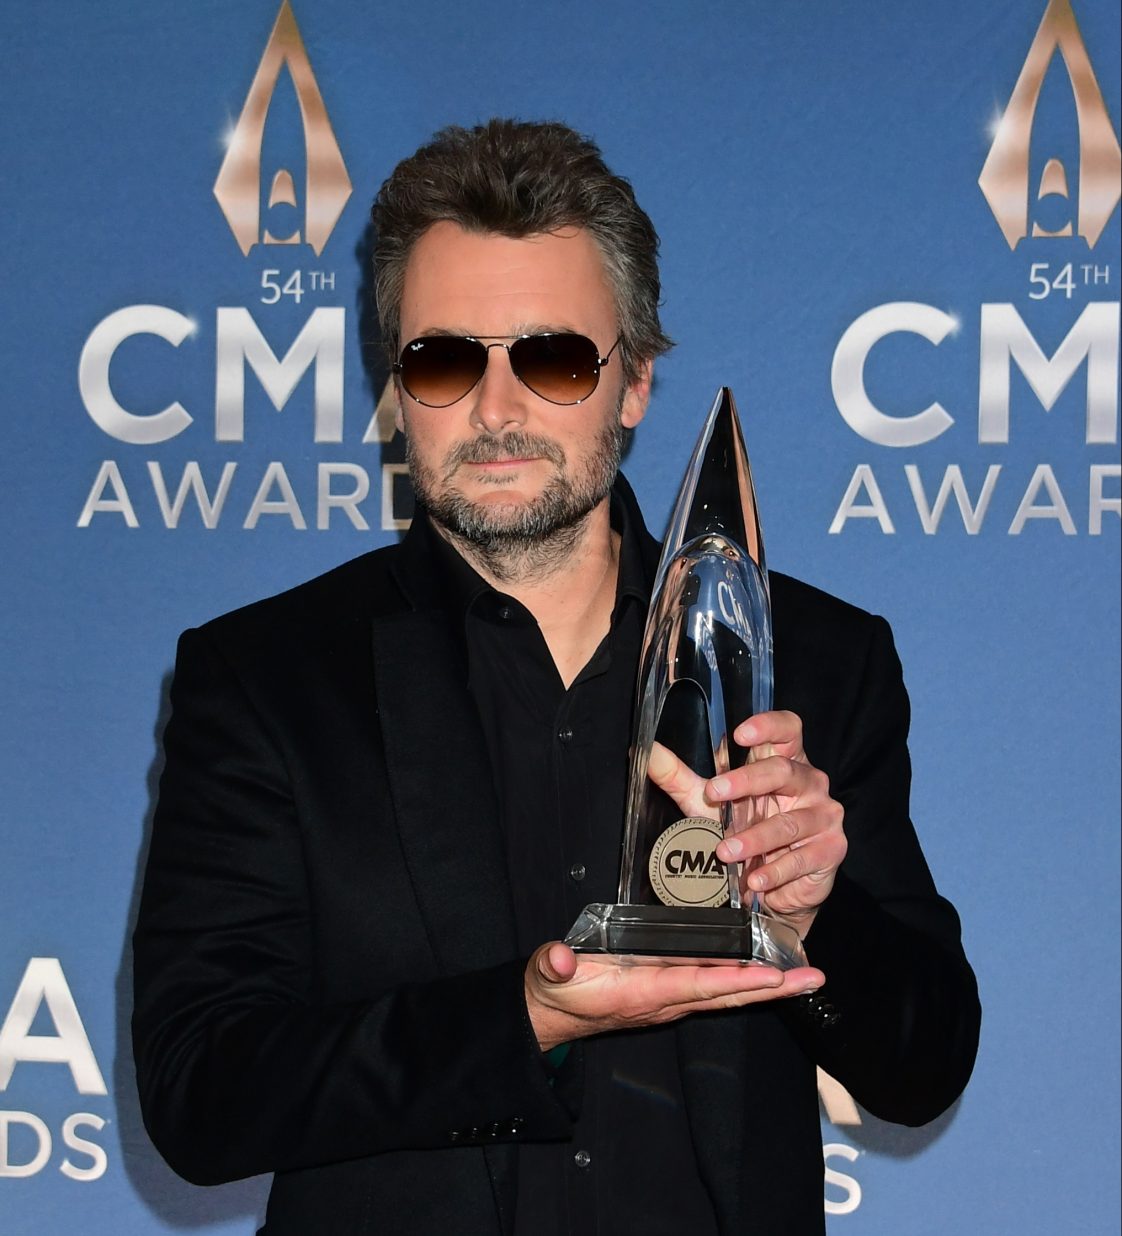 Eric Church Finally Wins CMA Award For Entertainer Of The Year